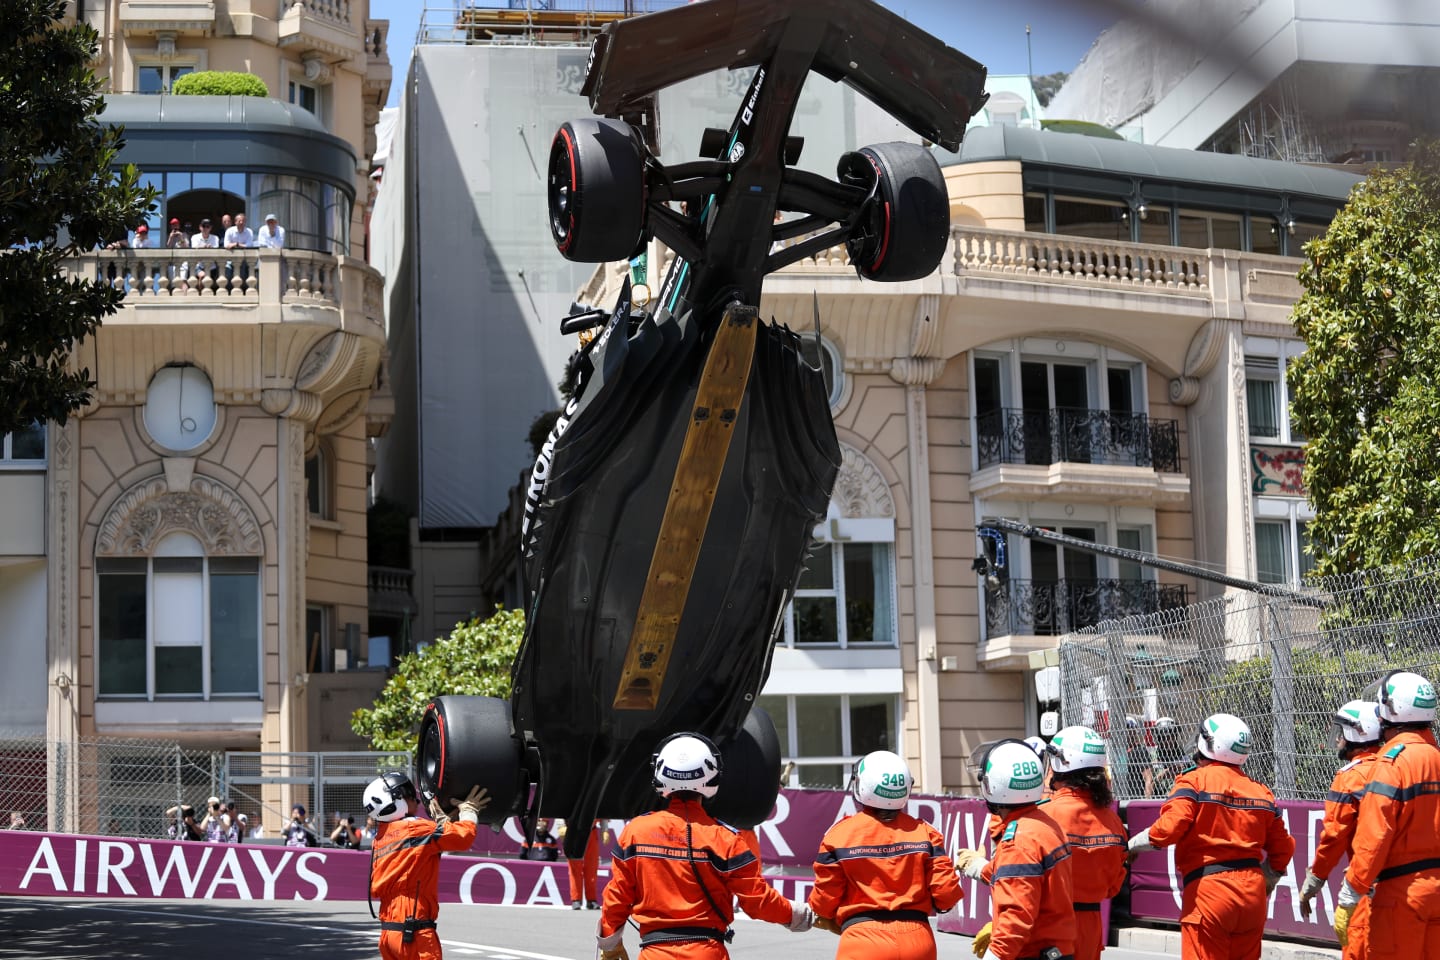 MONTE-CARLO, MONACO - MAY 27: The car of Lewis Hamilton of Great Britain and Mercedes is lifted on